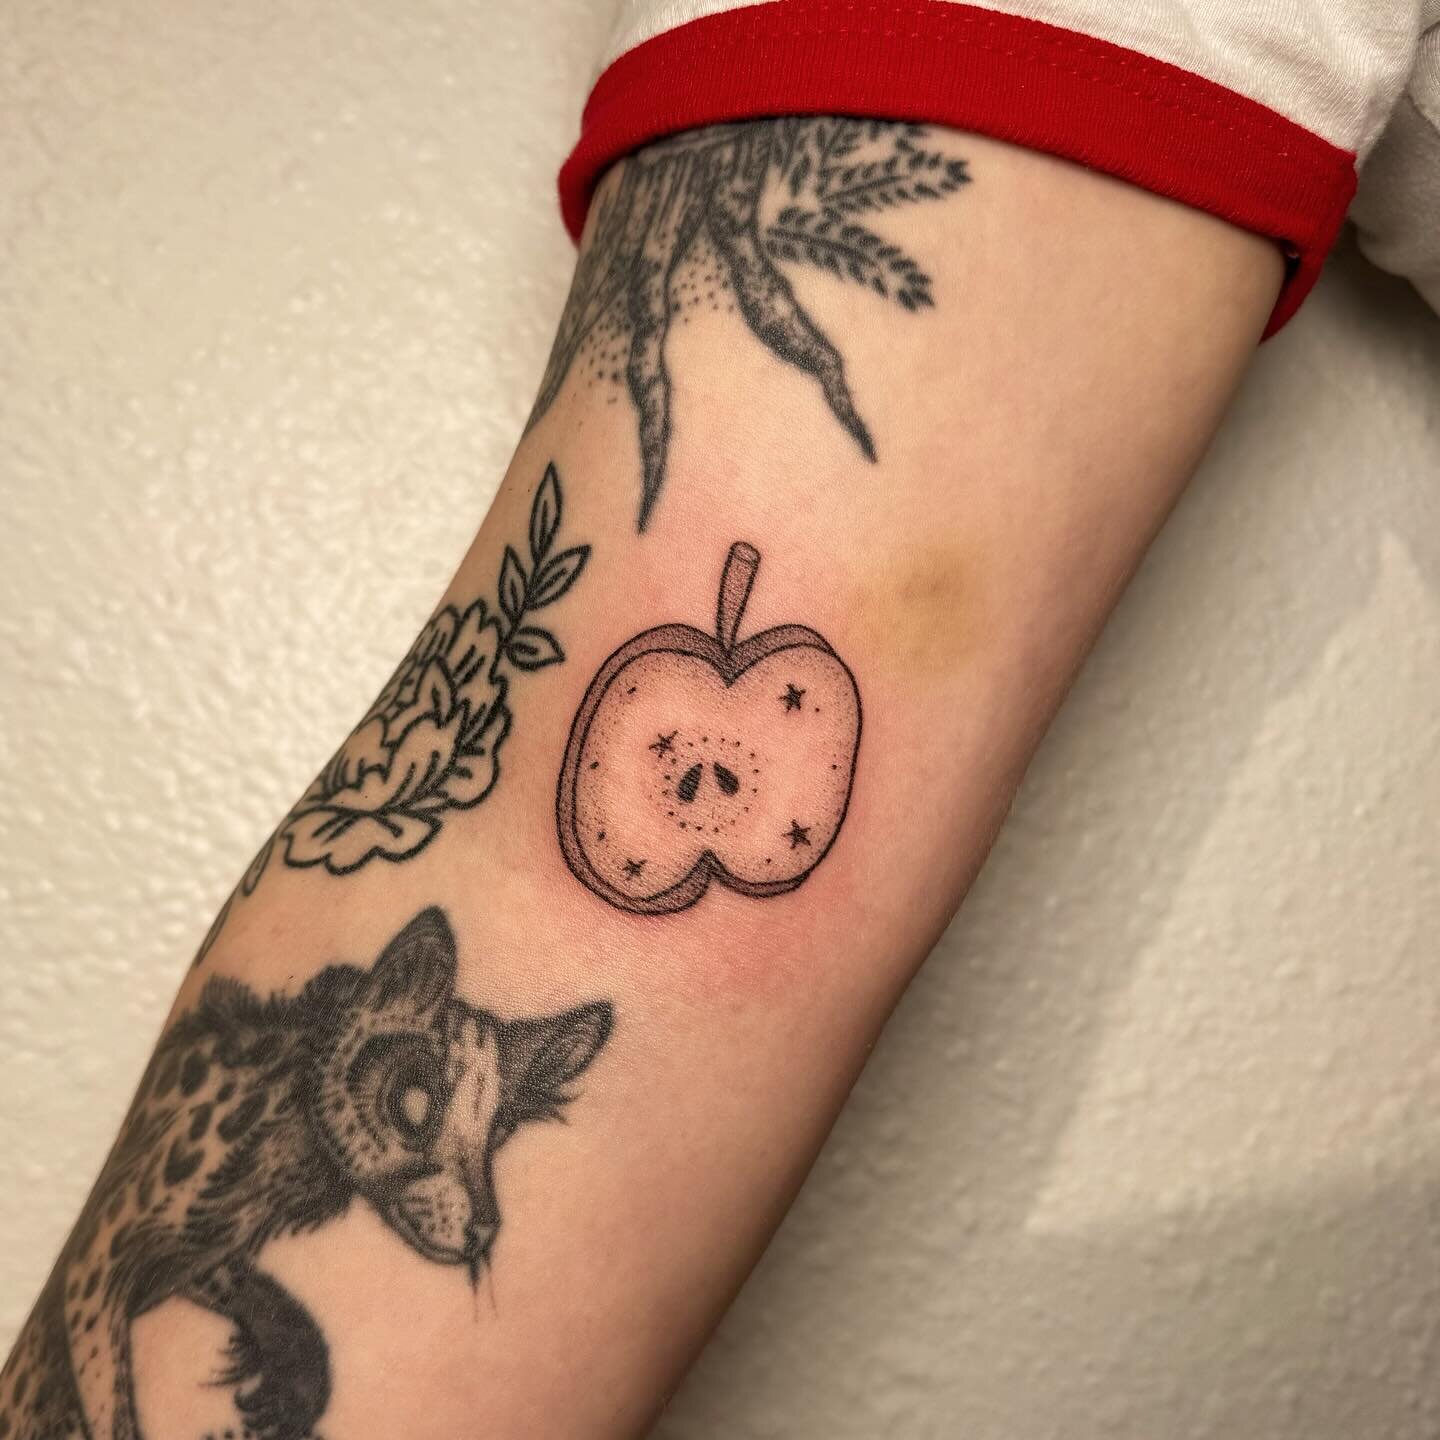 Adam and Eve tattoo black and grey with color half sleeve. Apple! Follow  @jo3ball on Instagram thanks!! | Eve tattoo, Apple tattoo, Tattoos